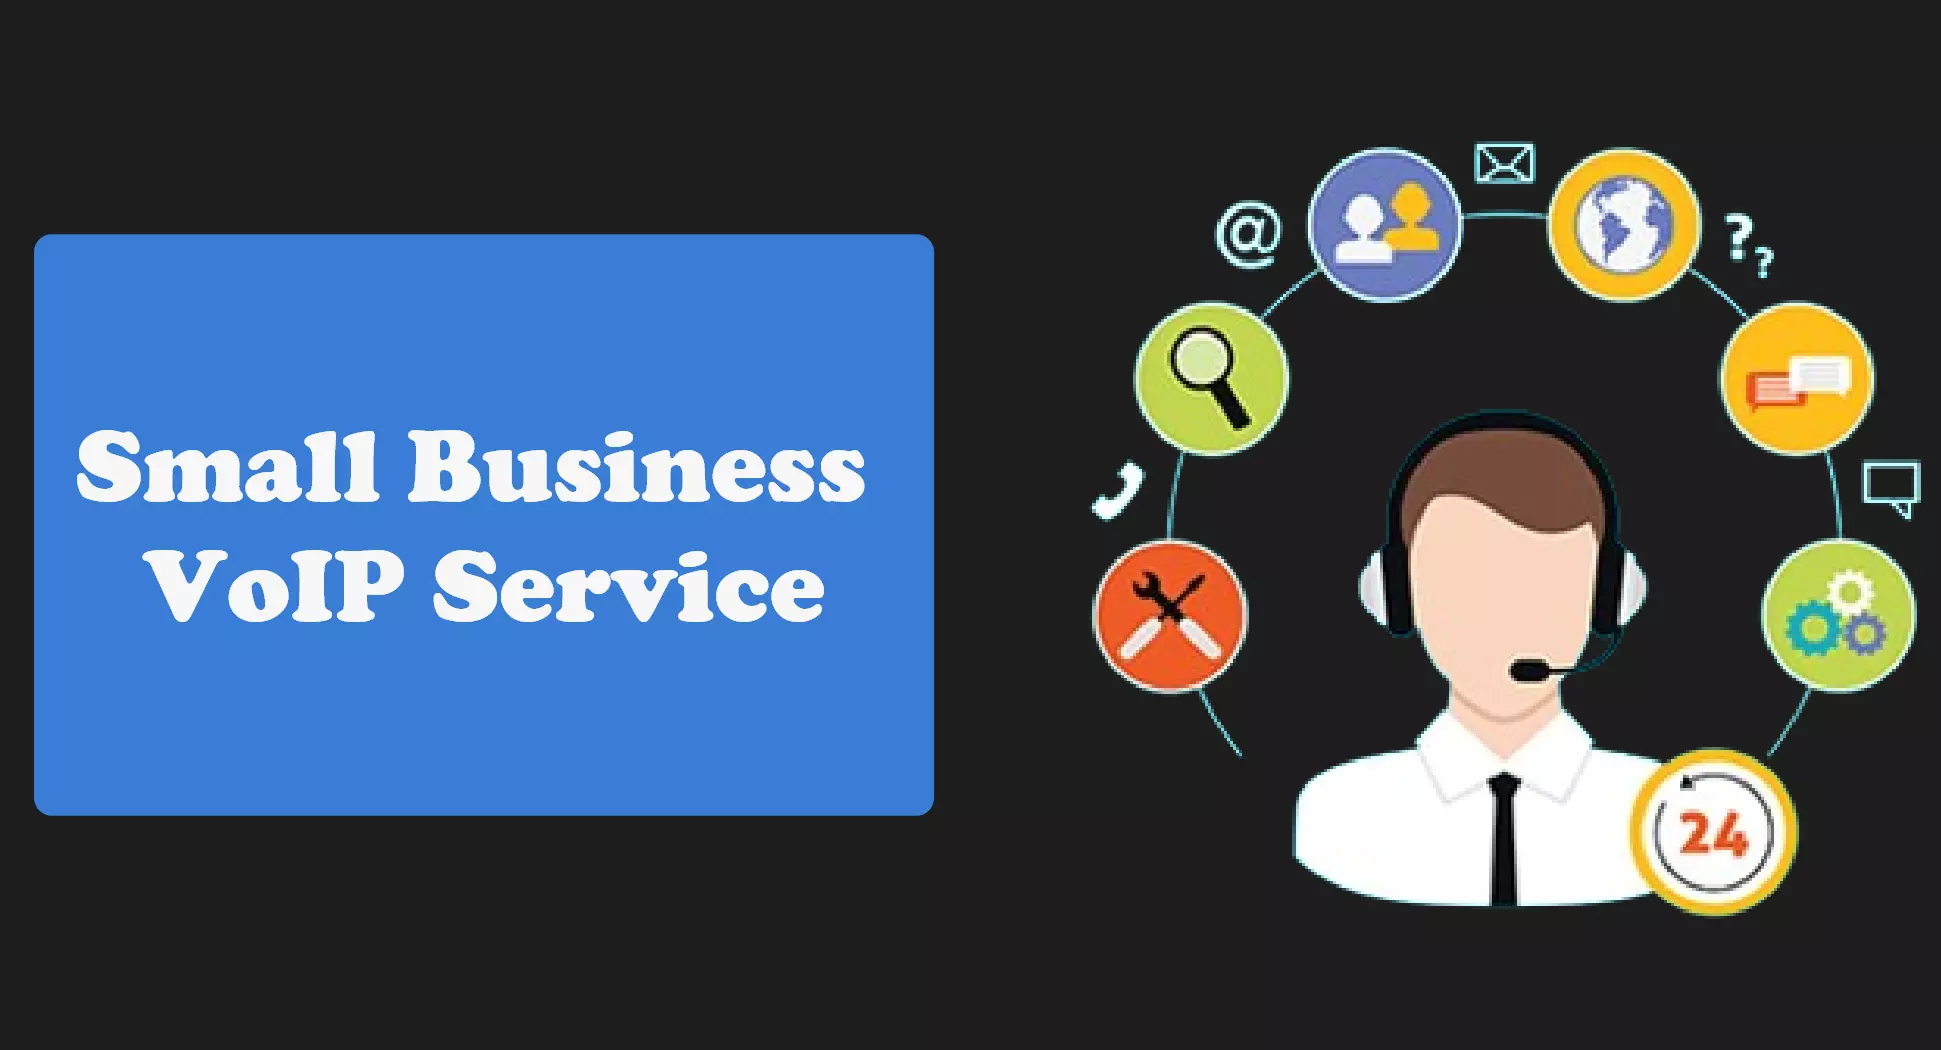 Small business voip service